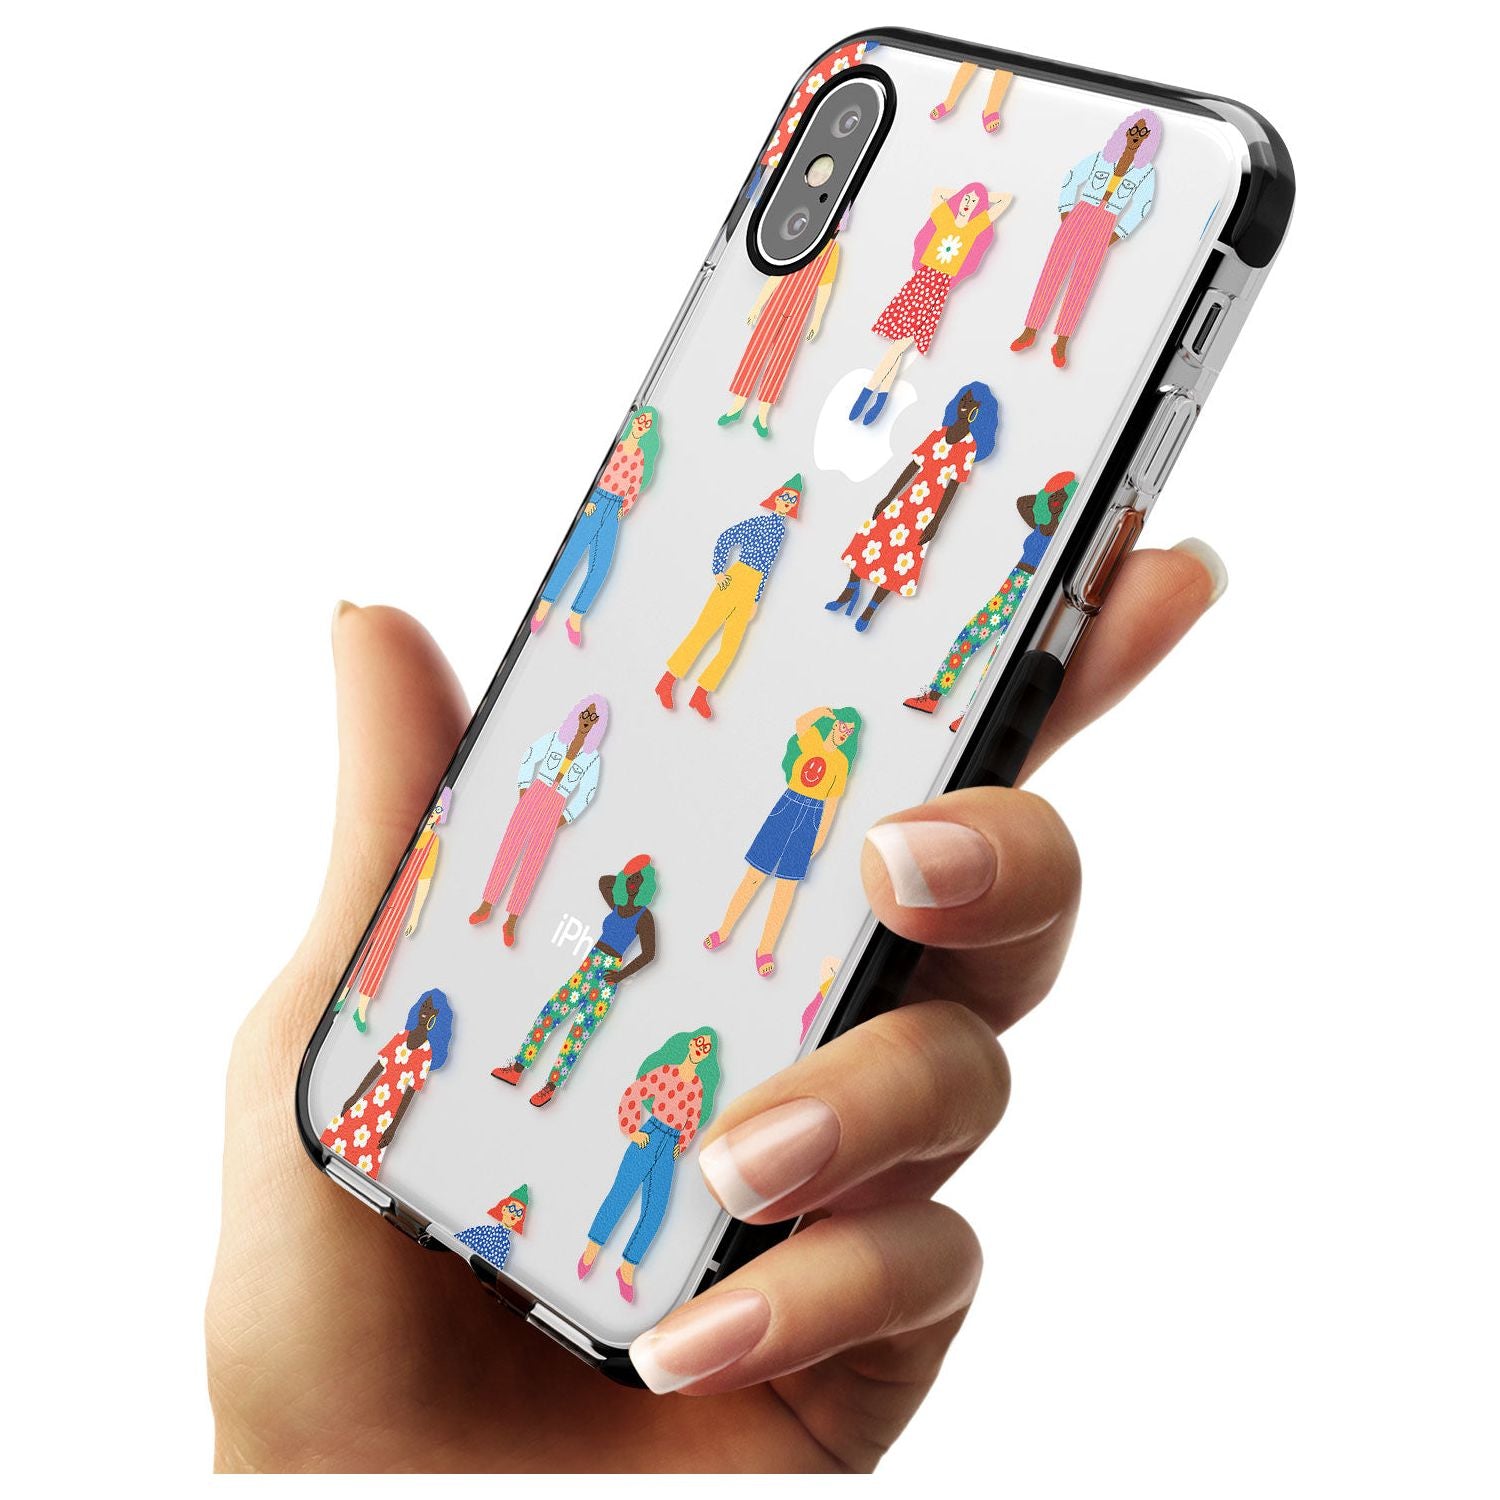 Girls Pattern Black Impact Phone Case for iPhone X XS Max XR